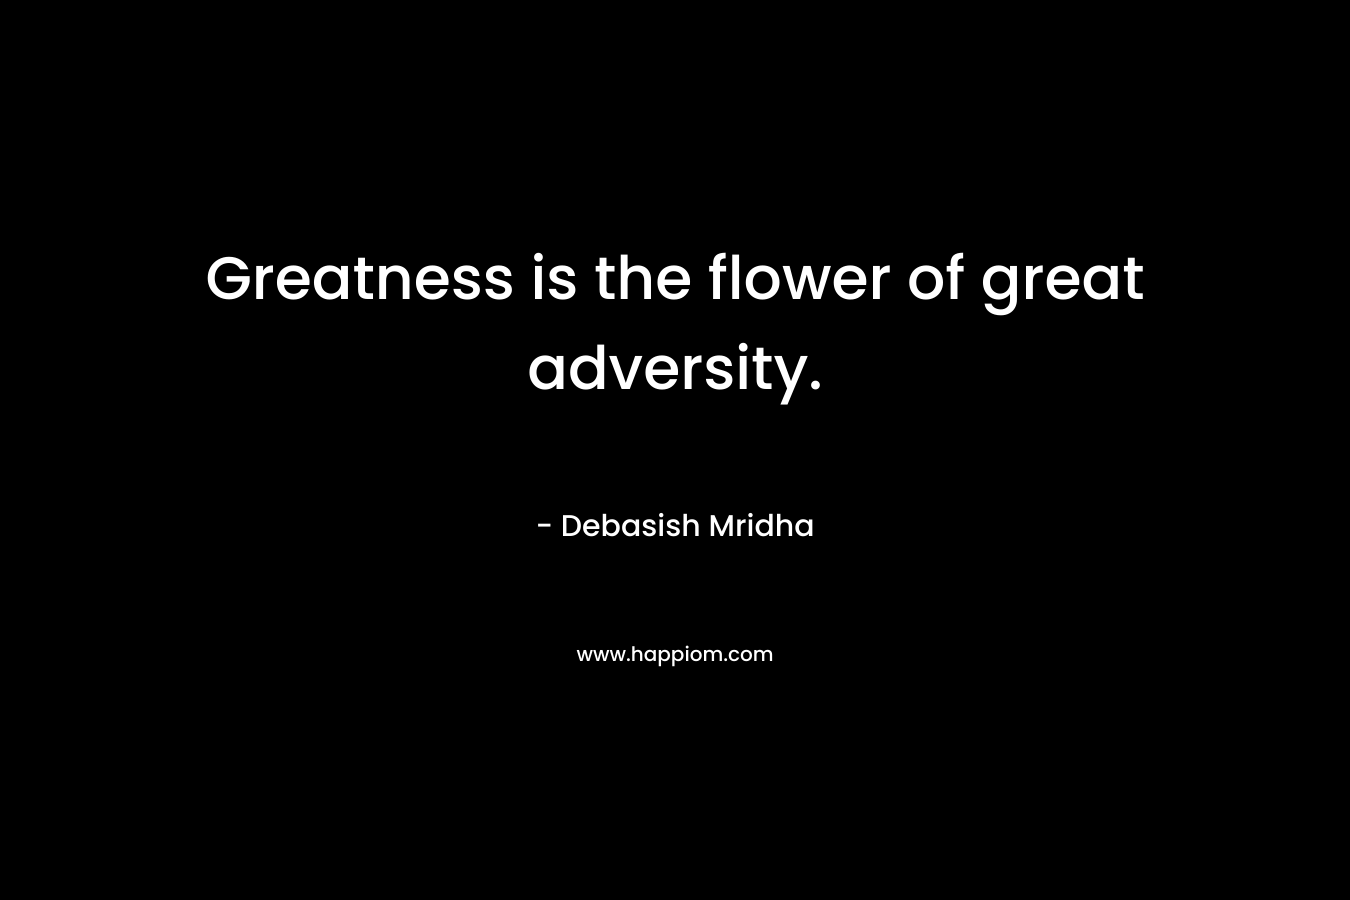 Greatness is the flower of great adversity.